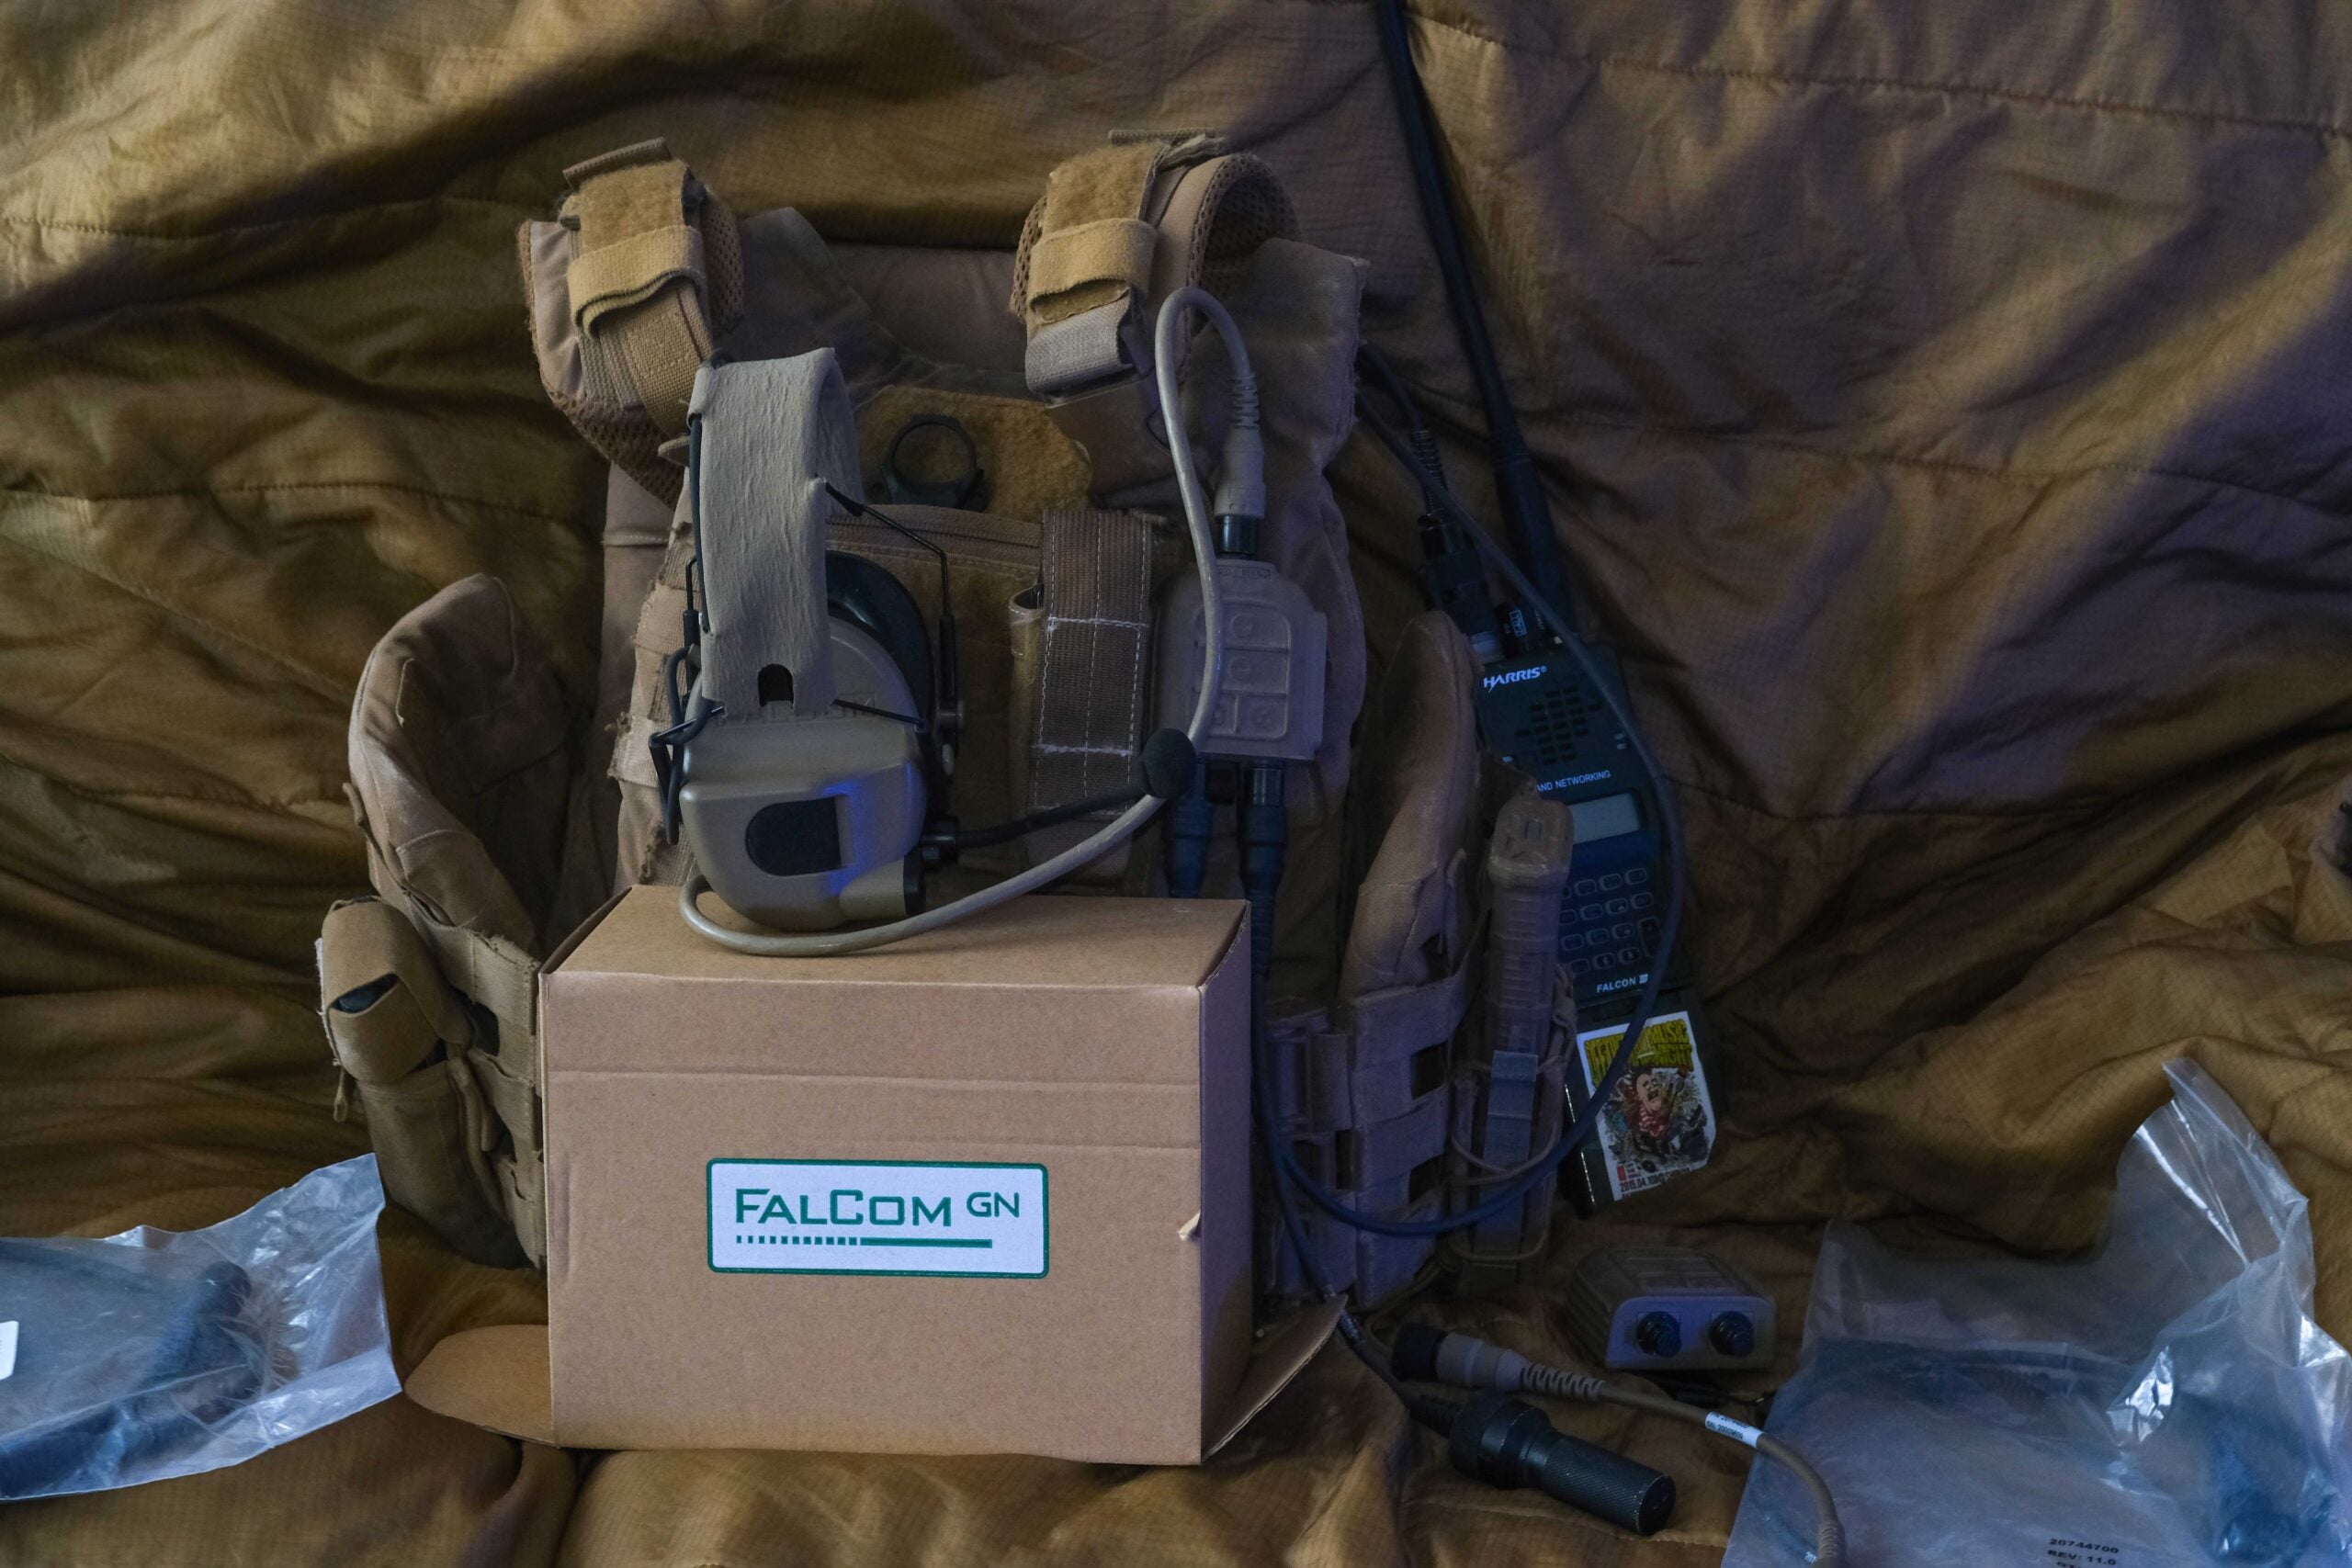 Unboxing the FalCom OTE2000 tactical headset.